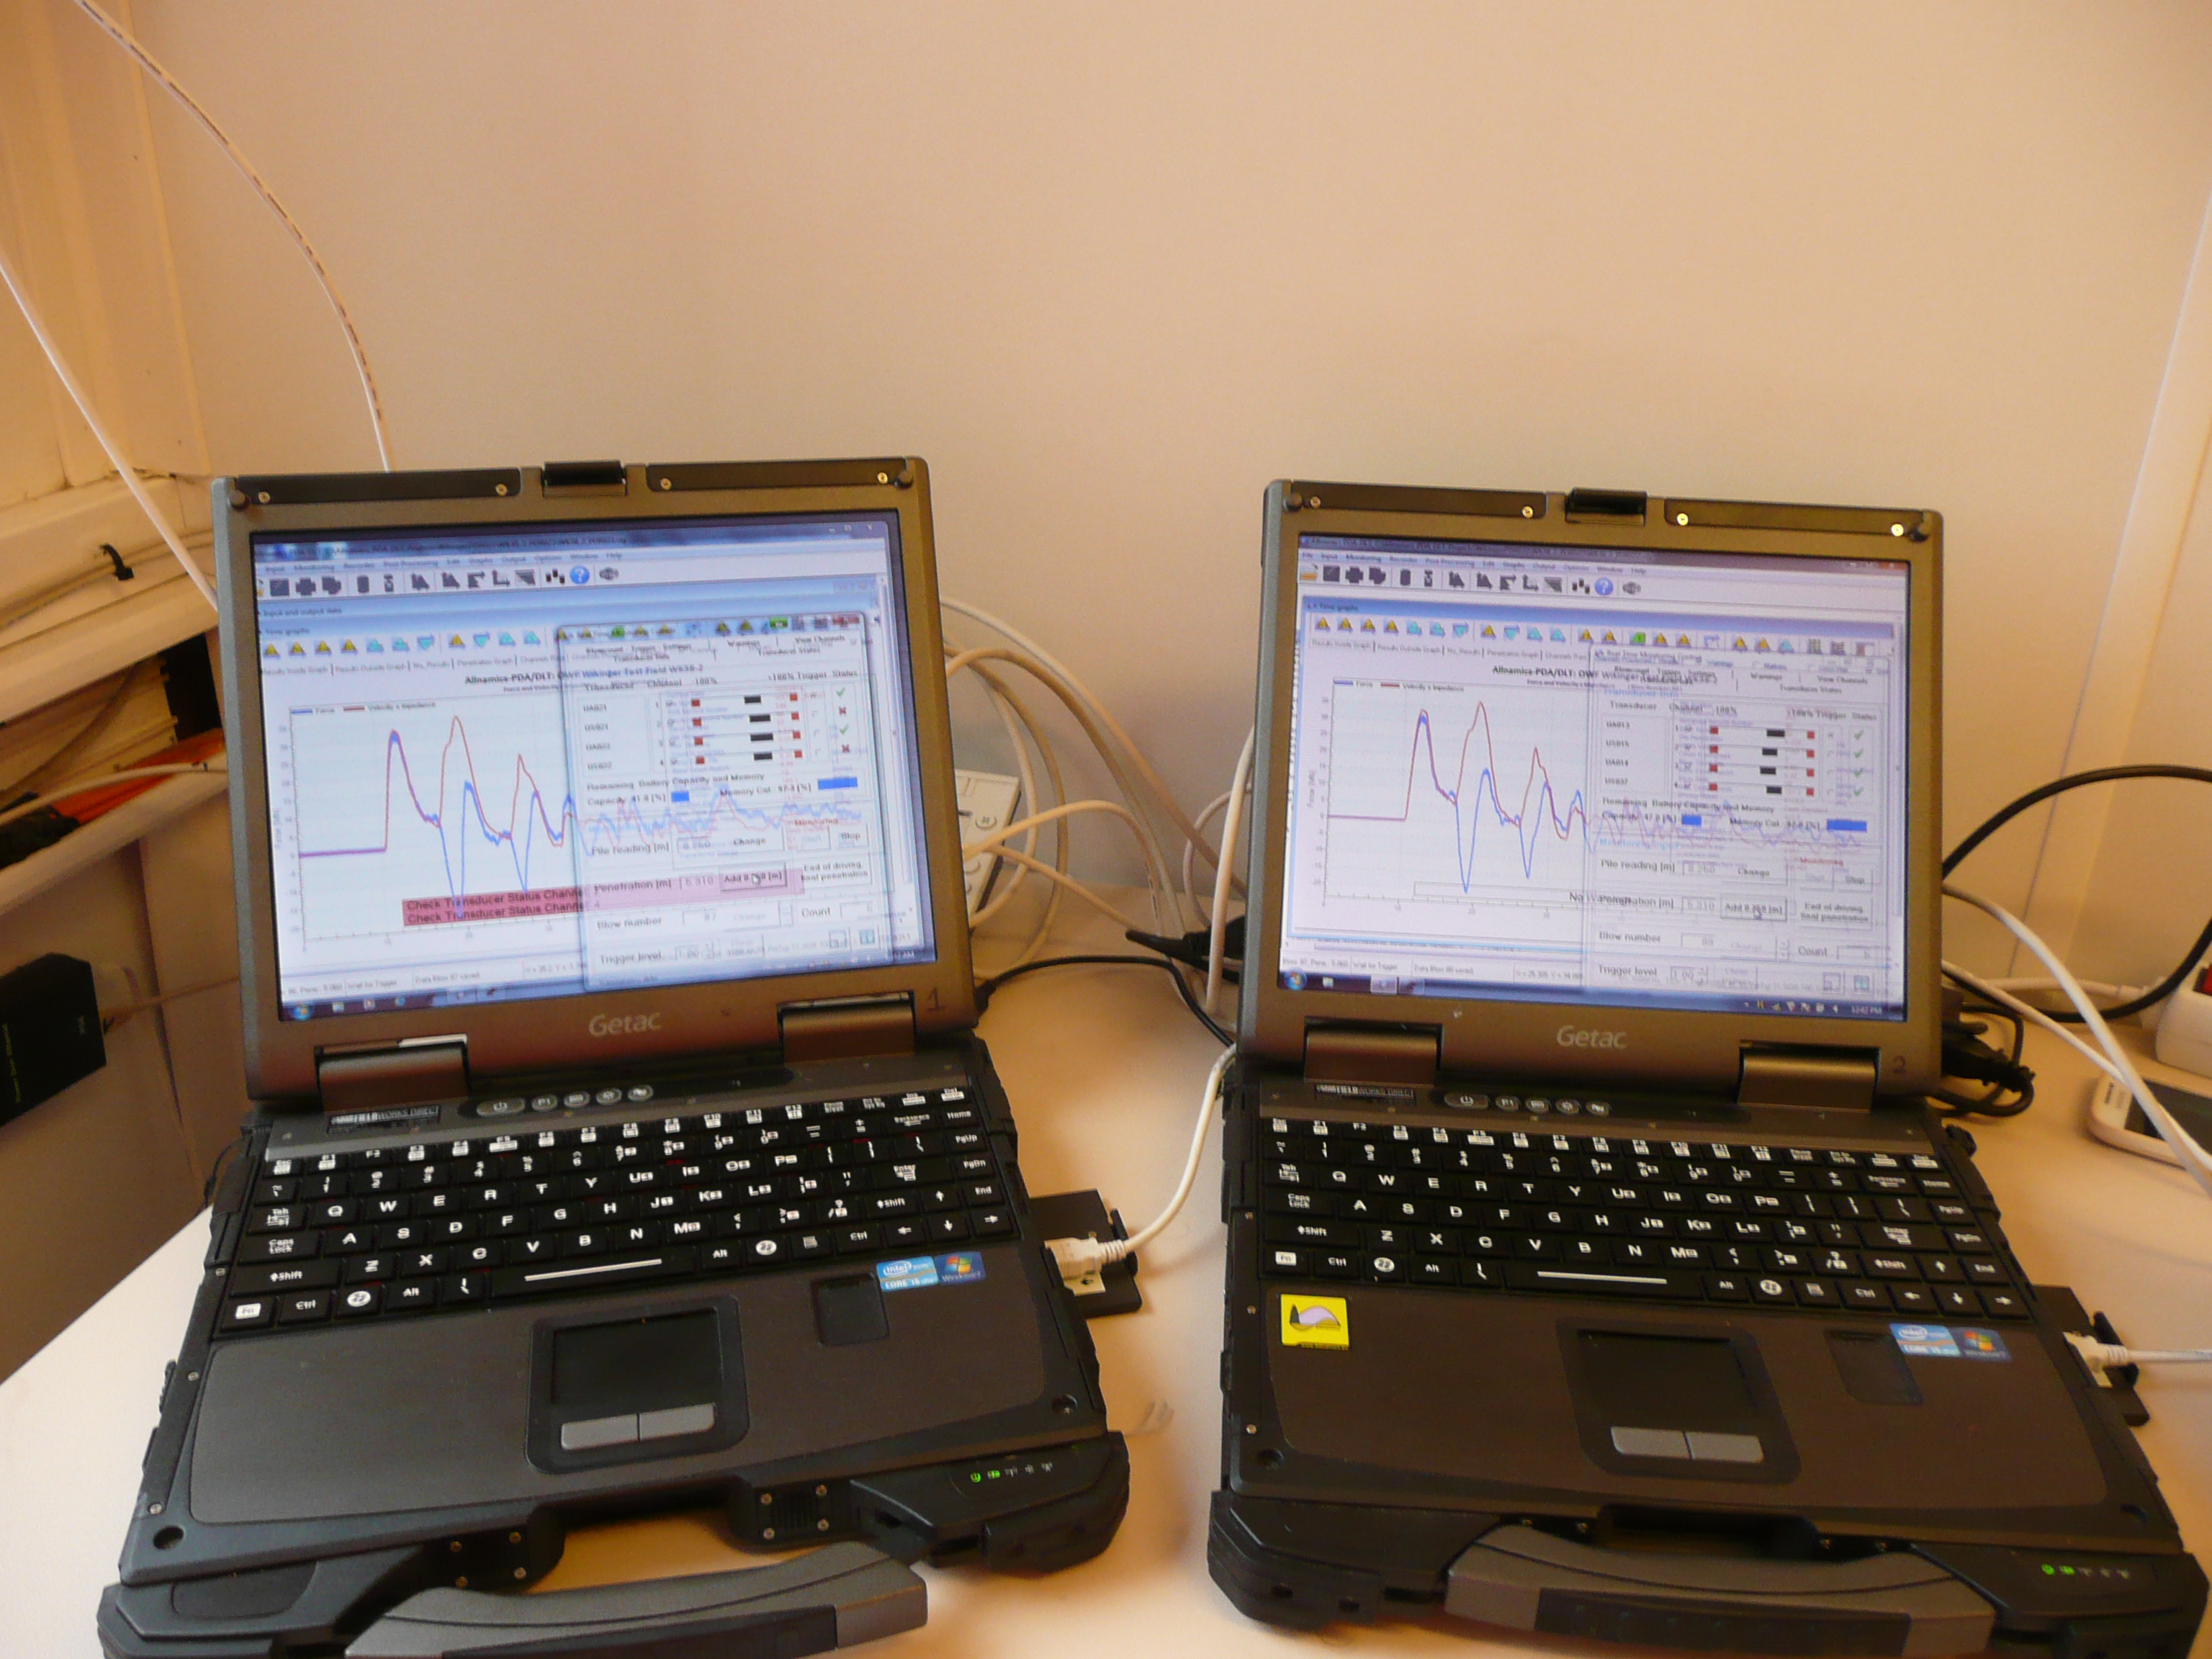 Leader-Follower setup with two coupled PDR's and two monitoring PC act as one PDA set for synchronized PDA monitoring of 8 channels